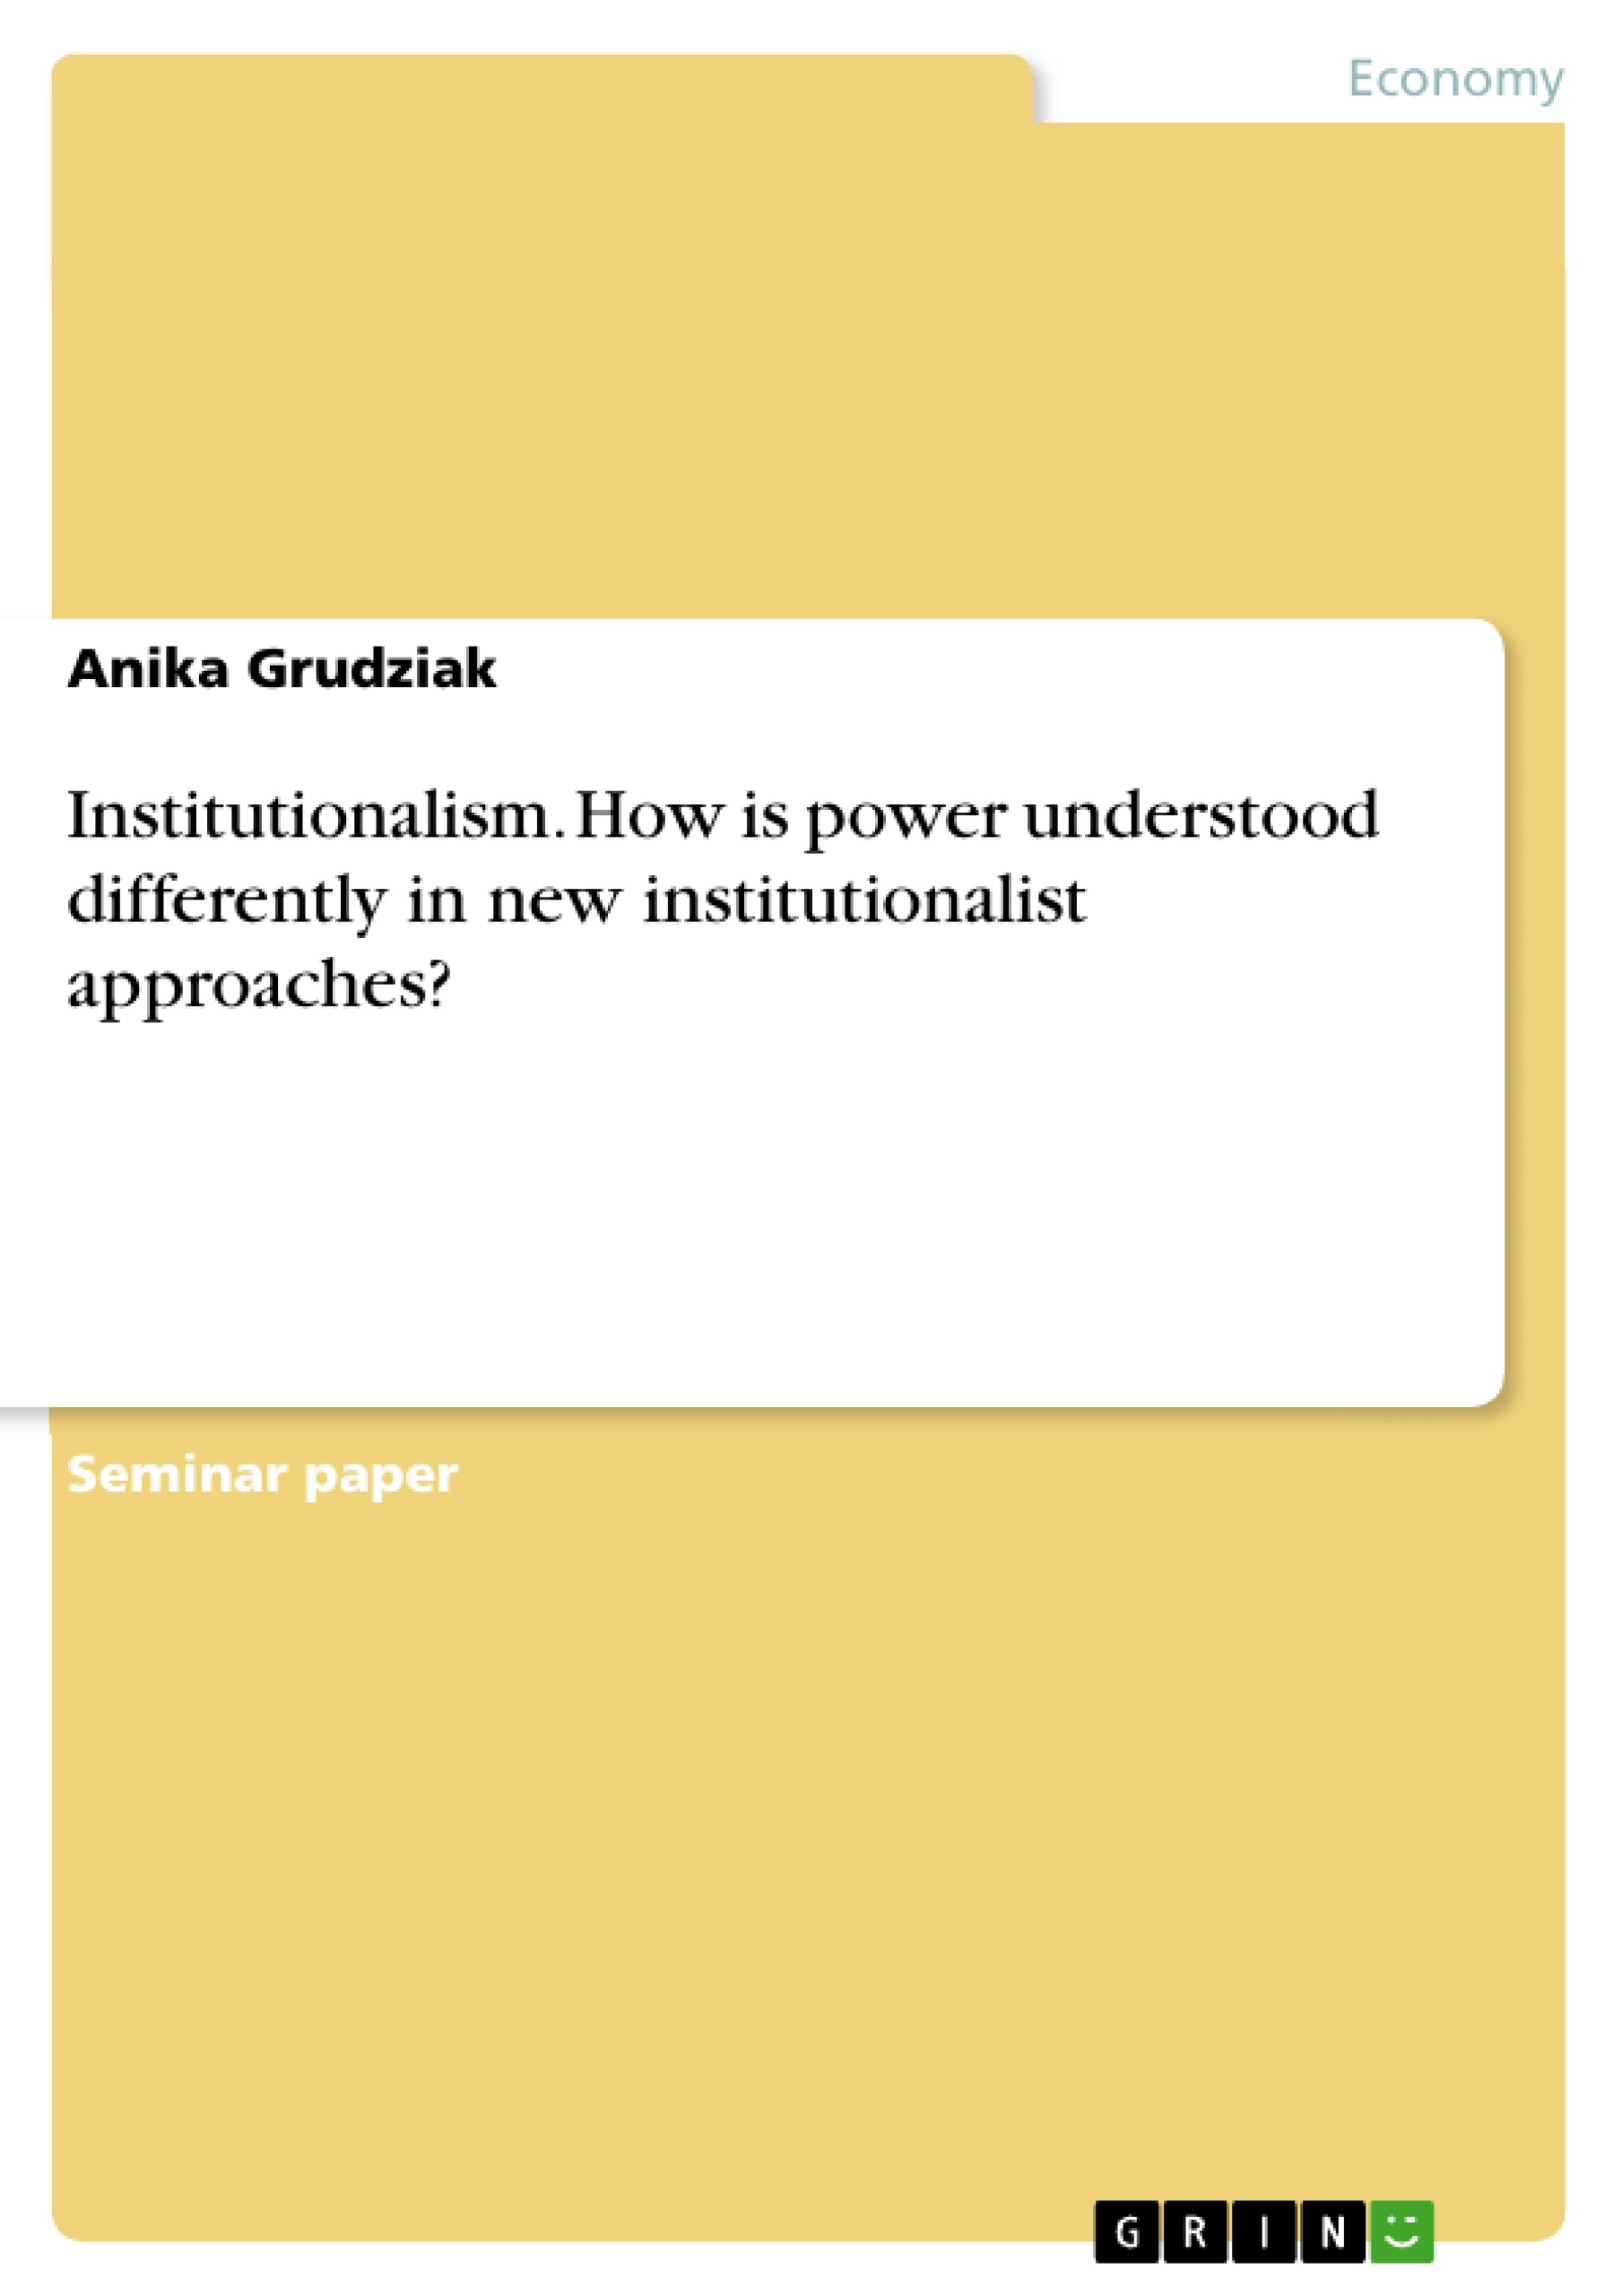 Title: Institutionalism. How is power understood differently in new institutionalist approaches?